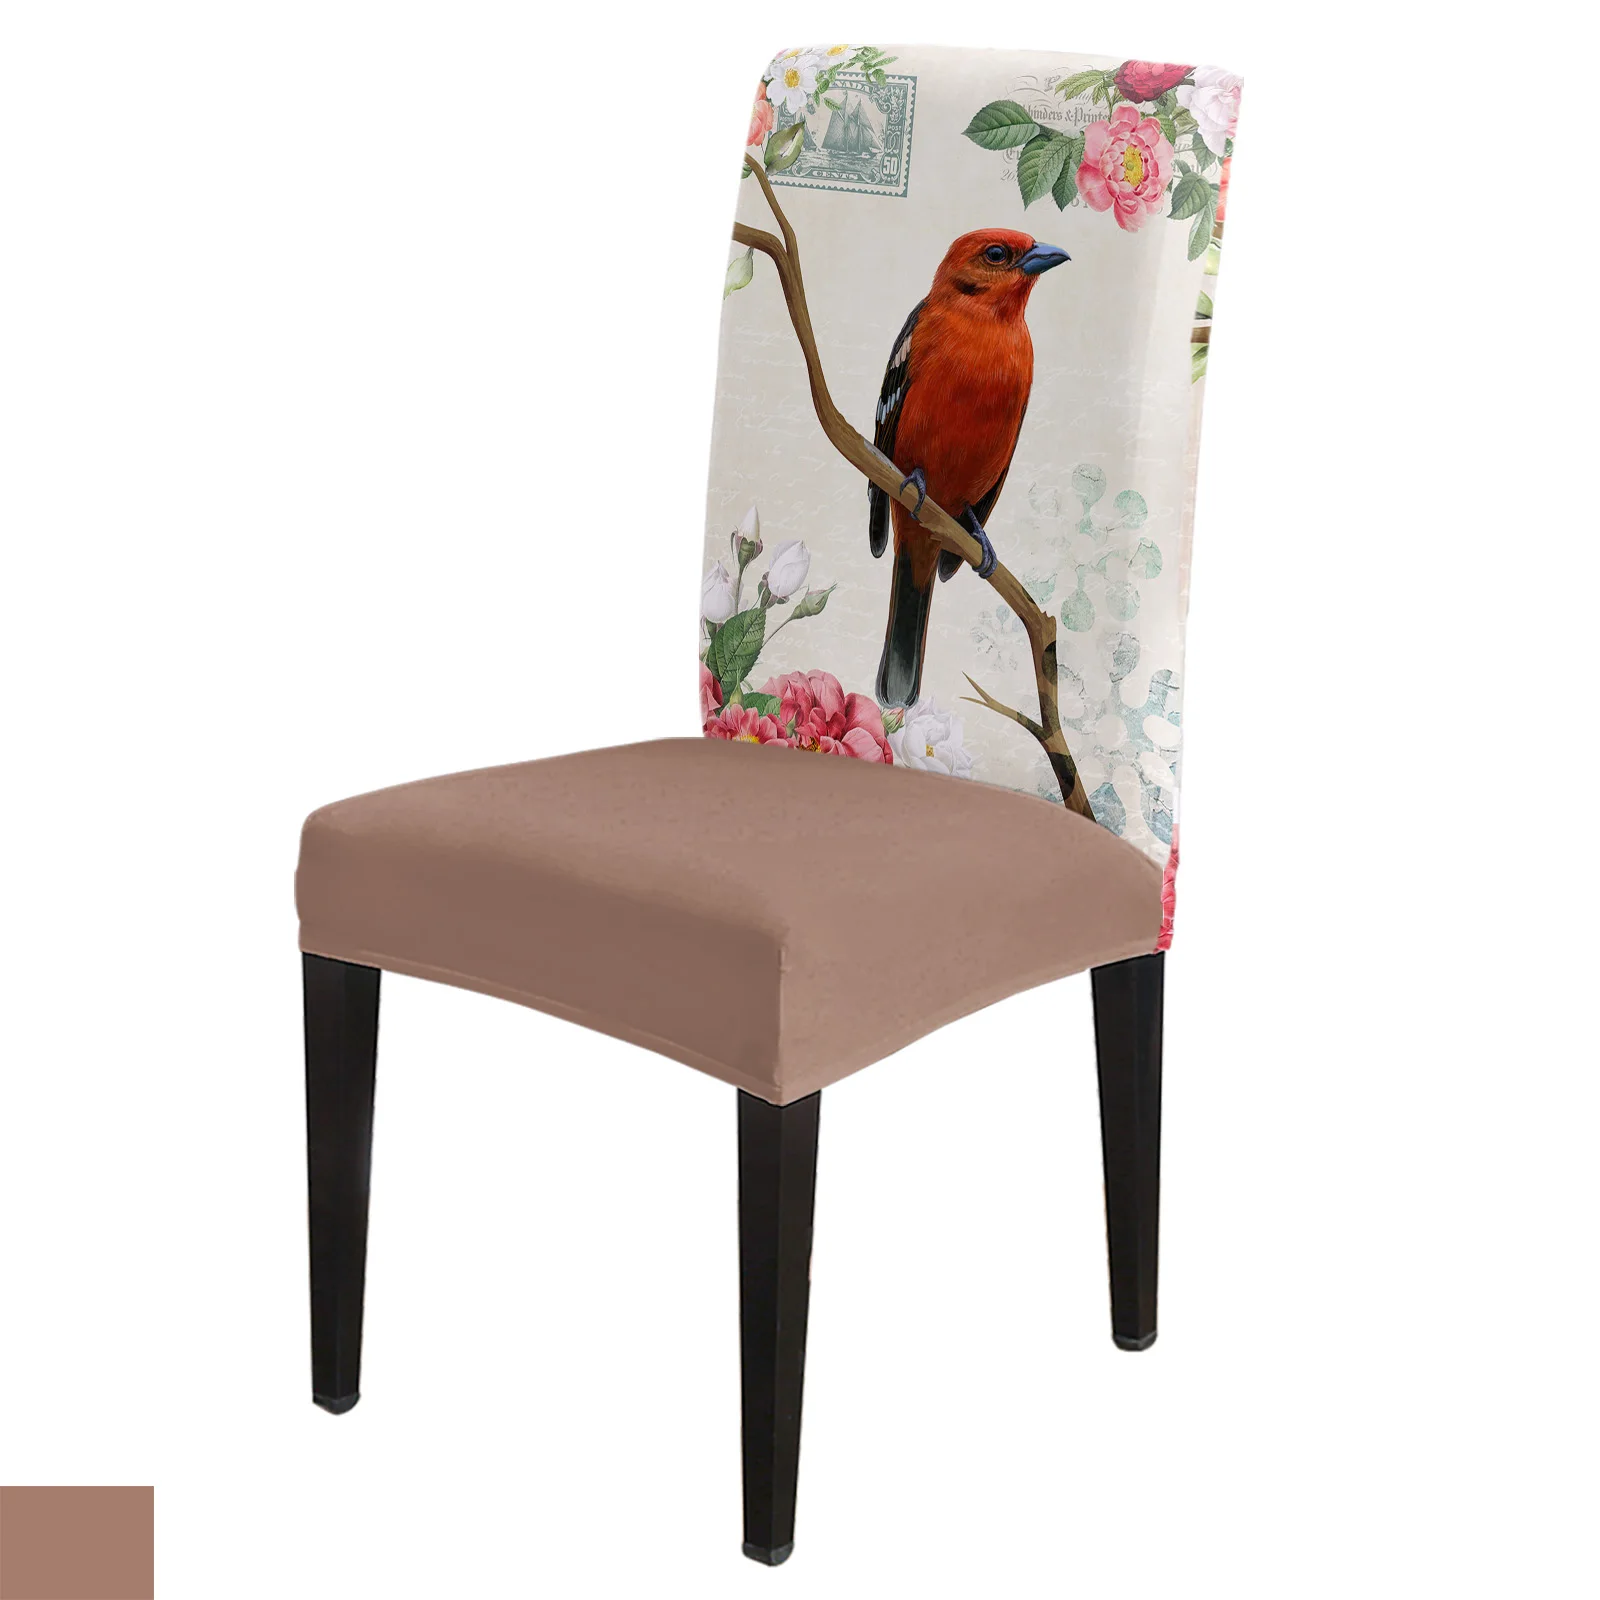 

Vintage Flowers And Birds Dining Chair Cover 4/6/8PCS Spandex Elastic Chair Slipcover Case for Wedding Hotel Banquet Dining Room